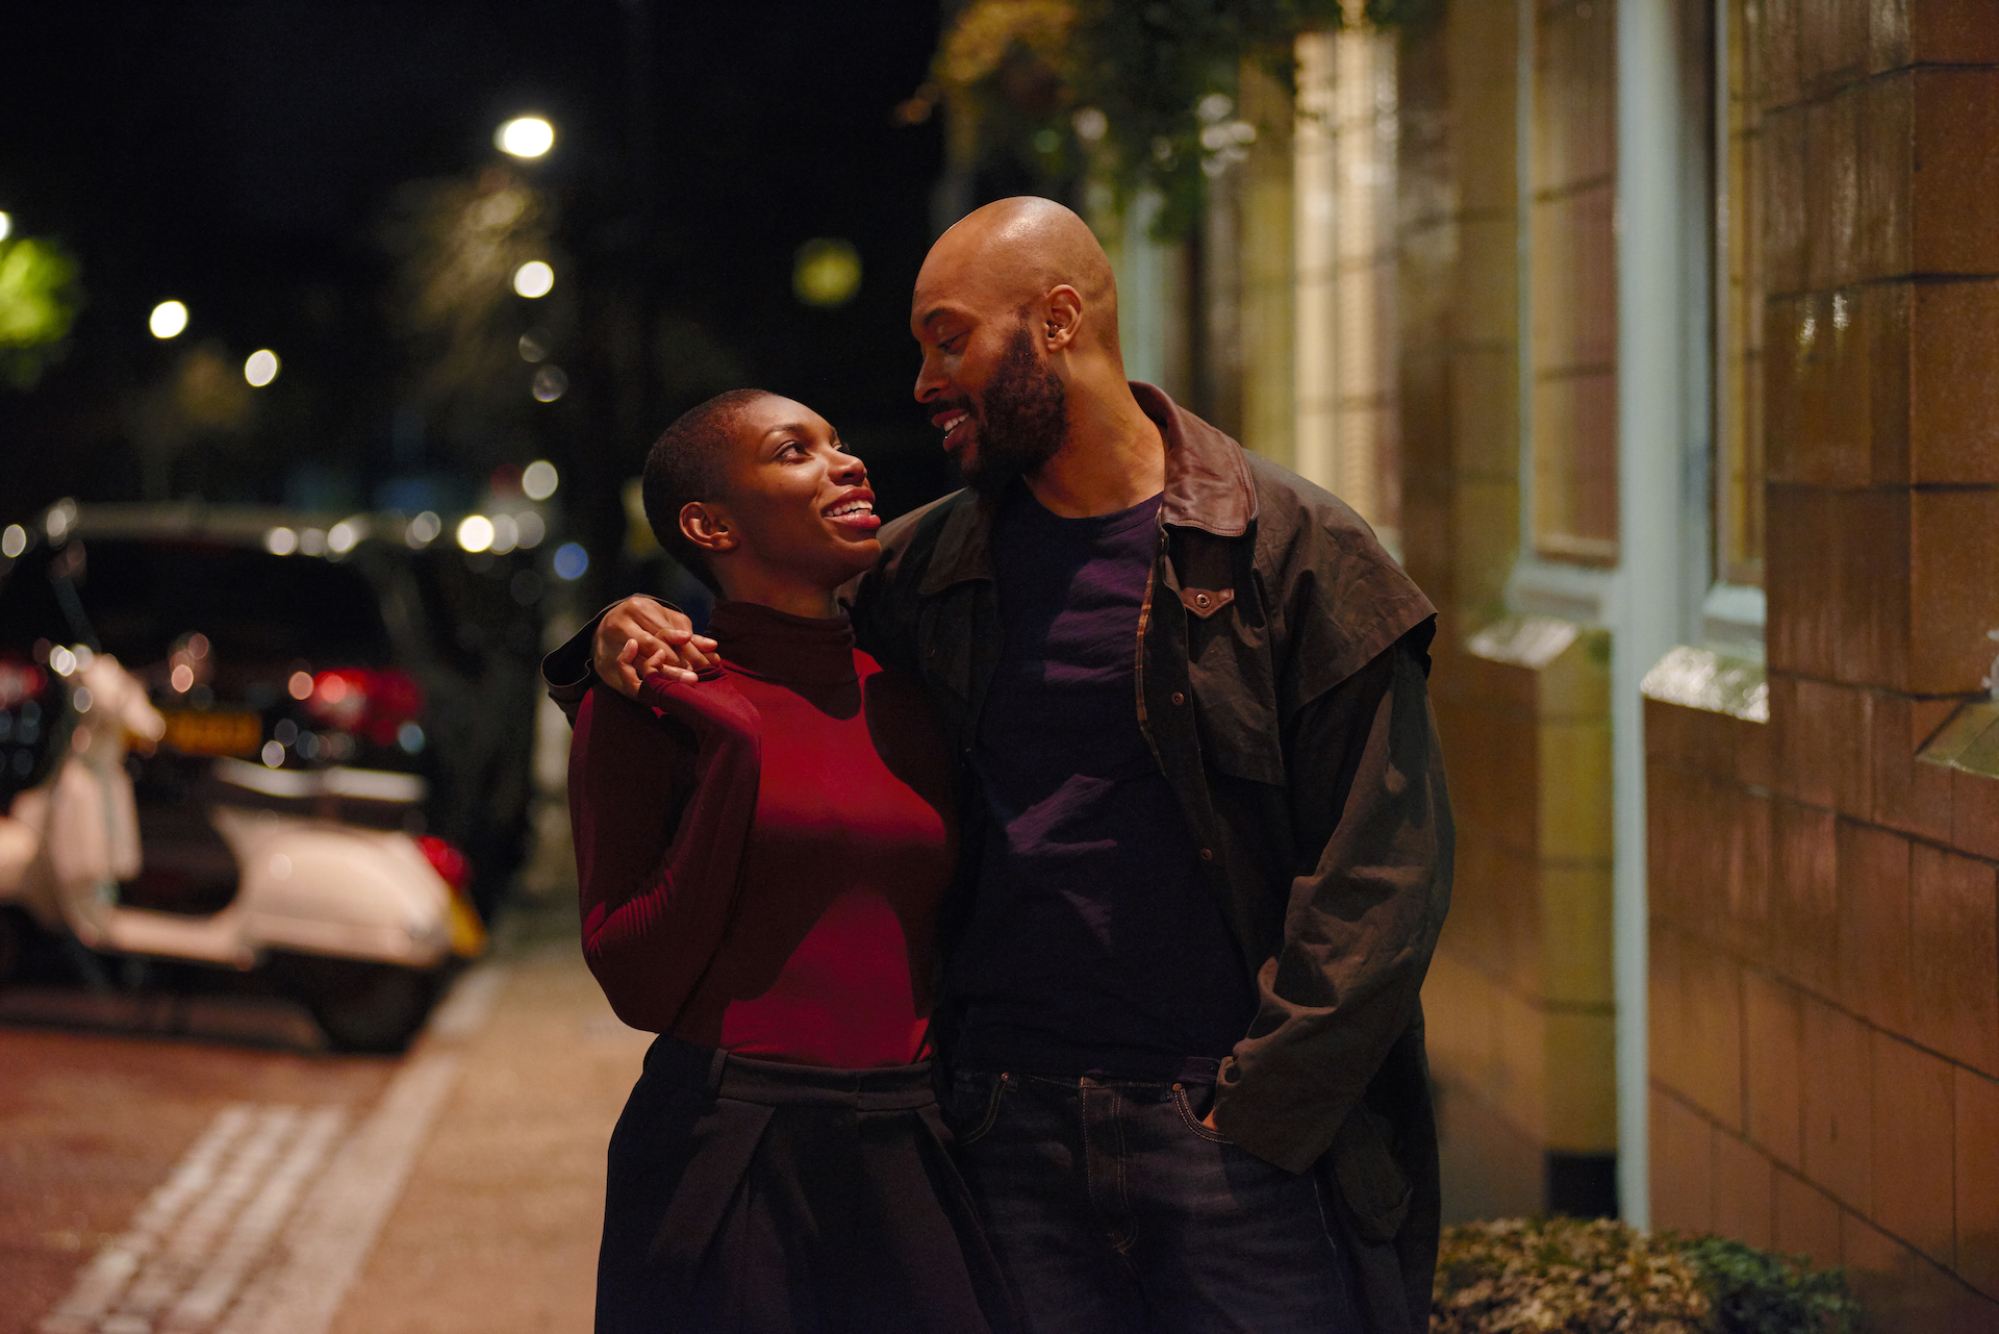 A scene from "Been So Long": happy couple on the street